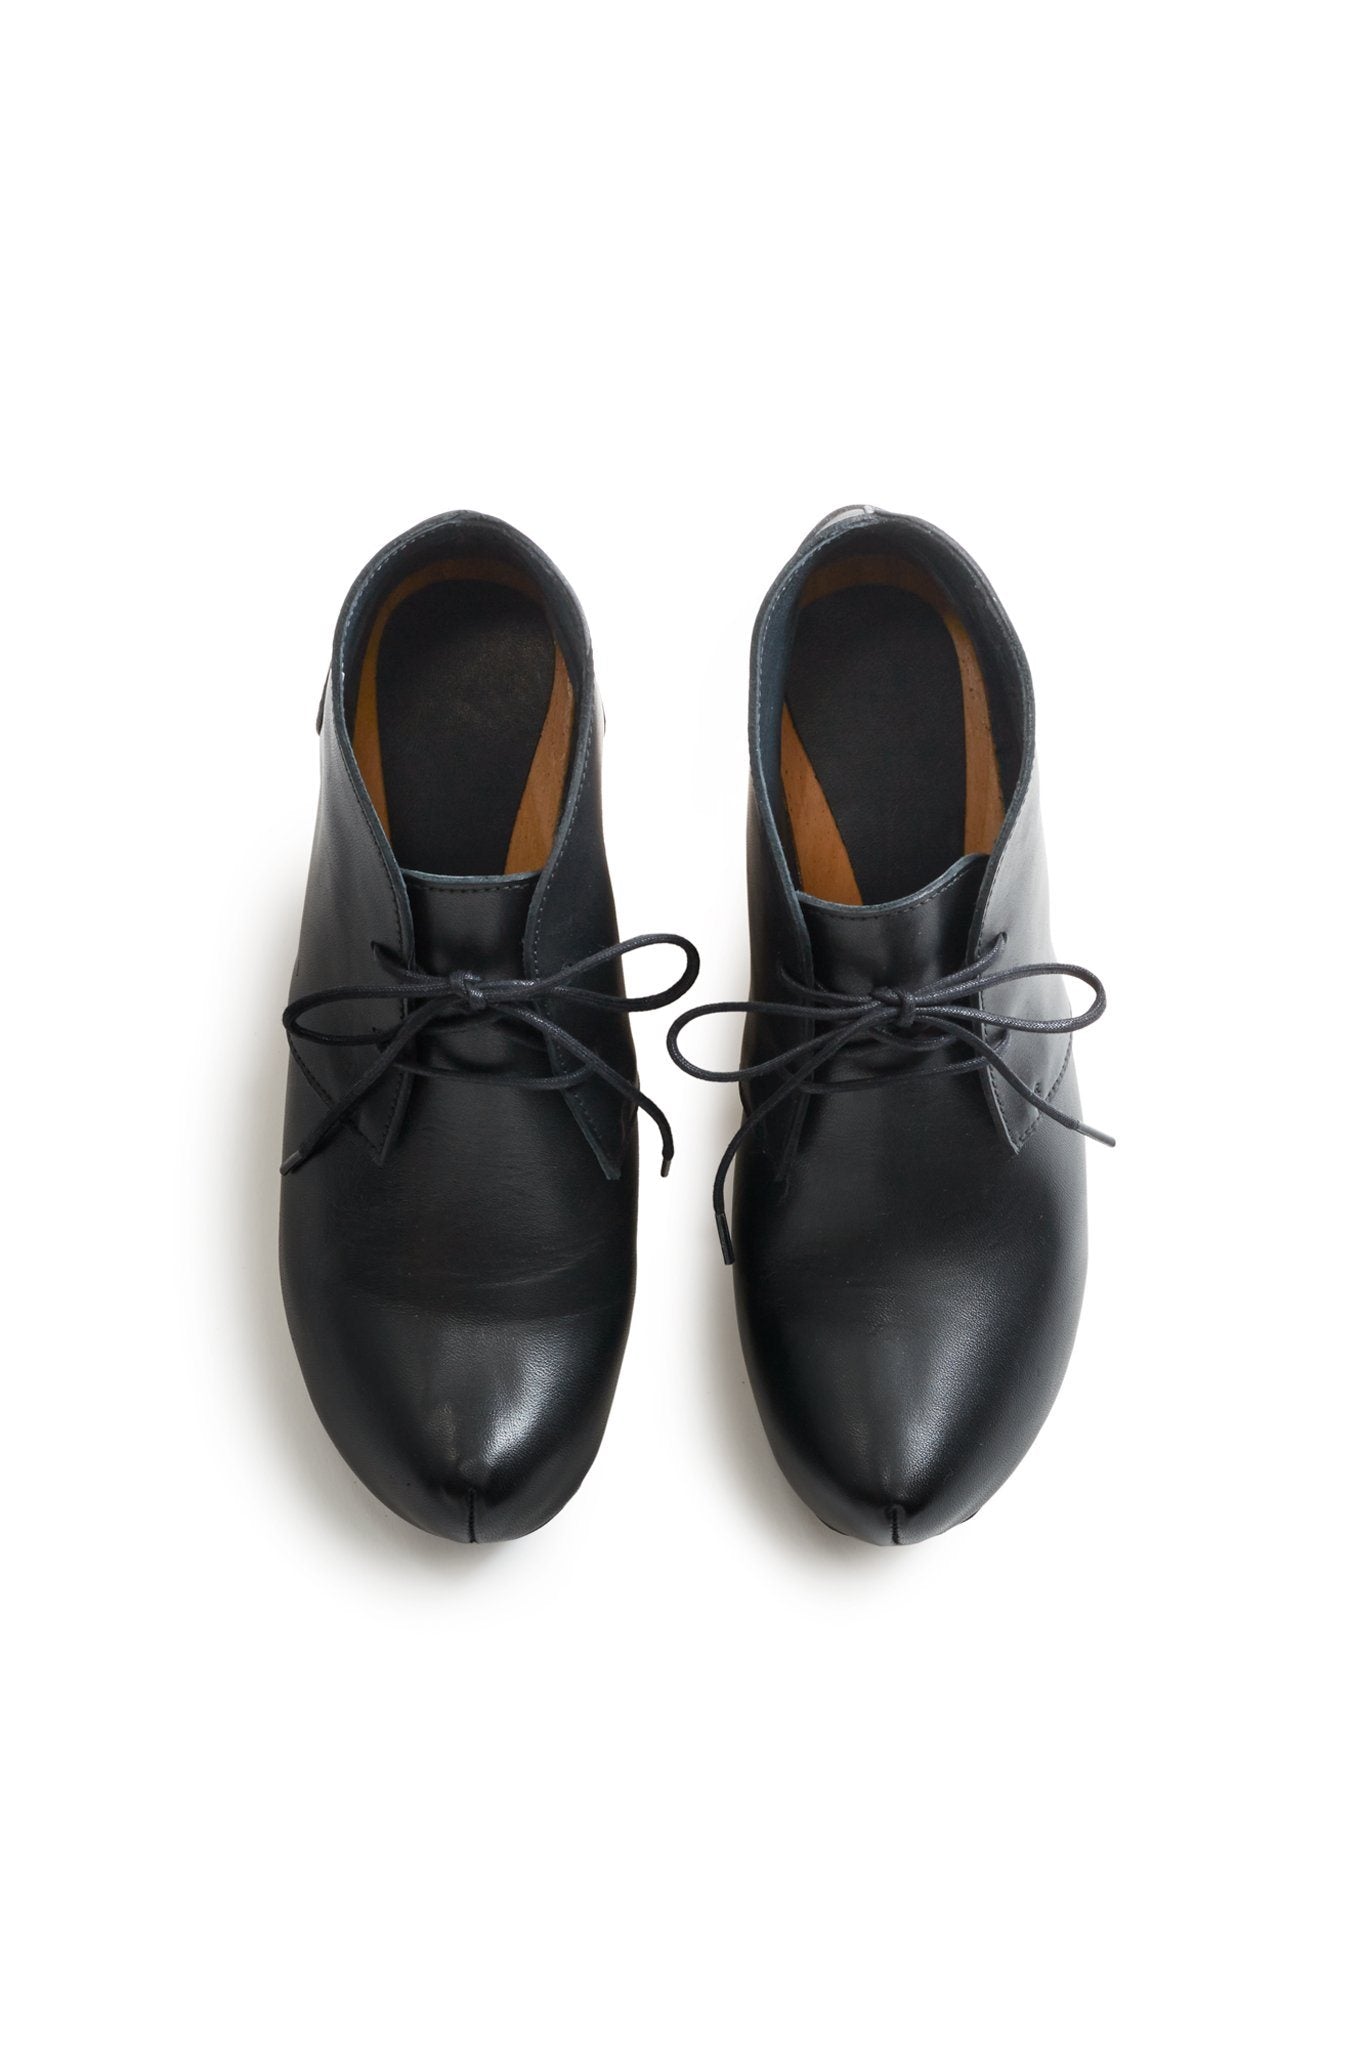 toe seam leather bootie clogs in black Clogs lisa b. 